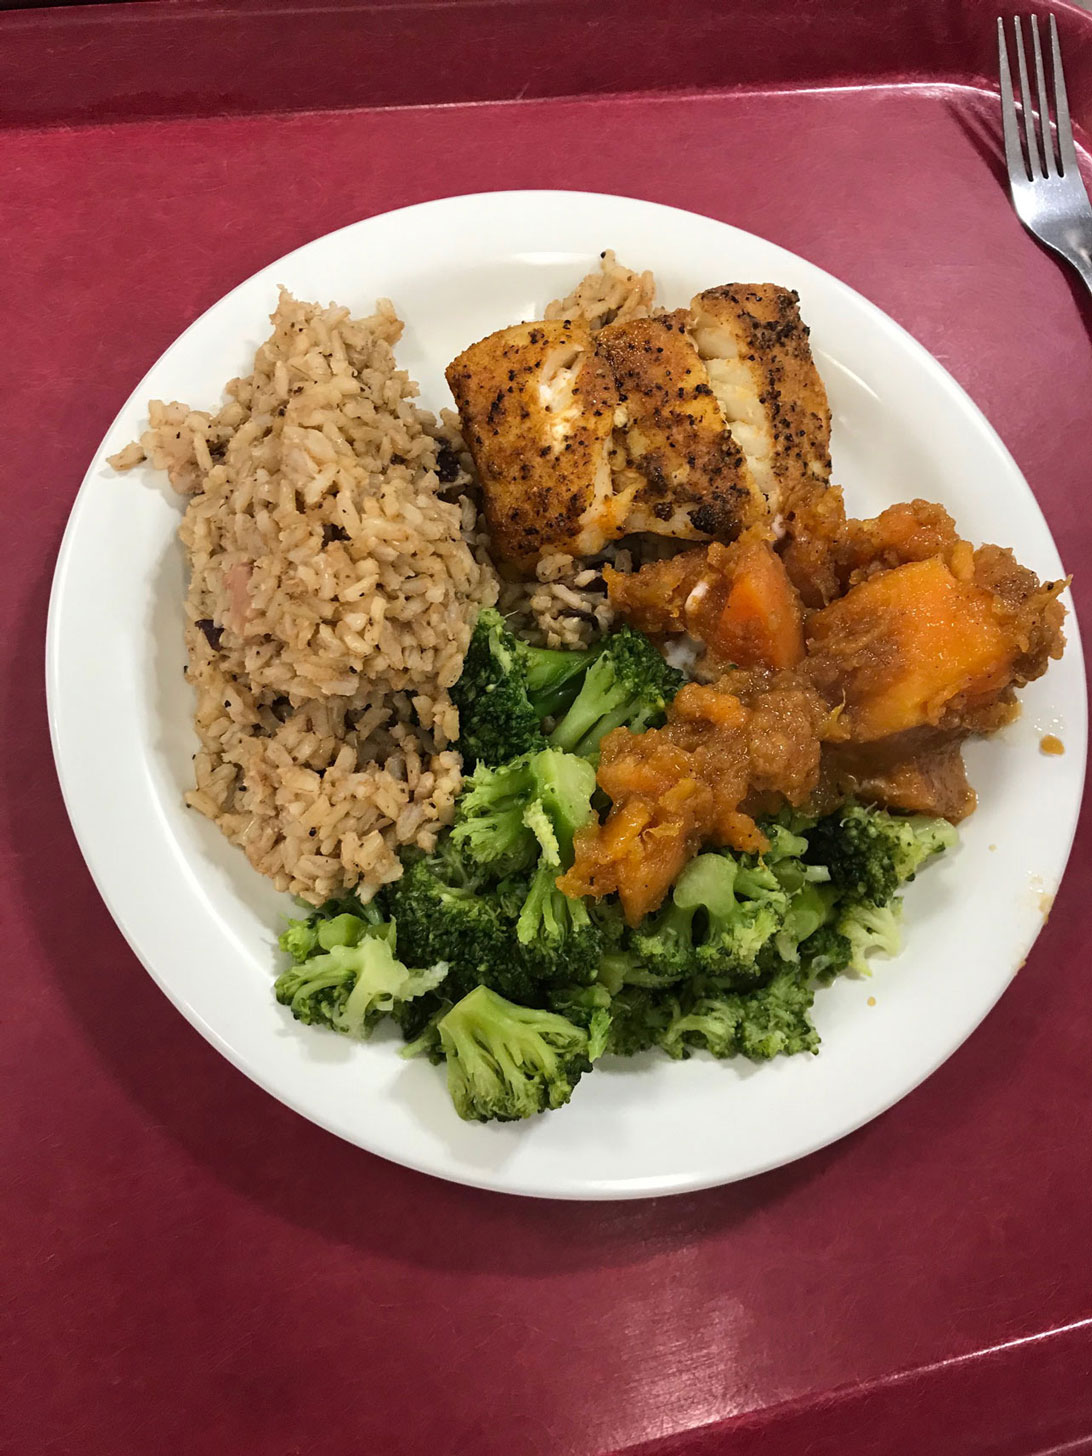 Dinner plate with healthy options